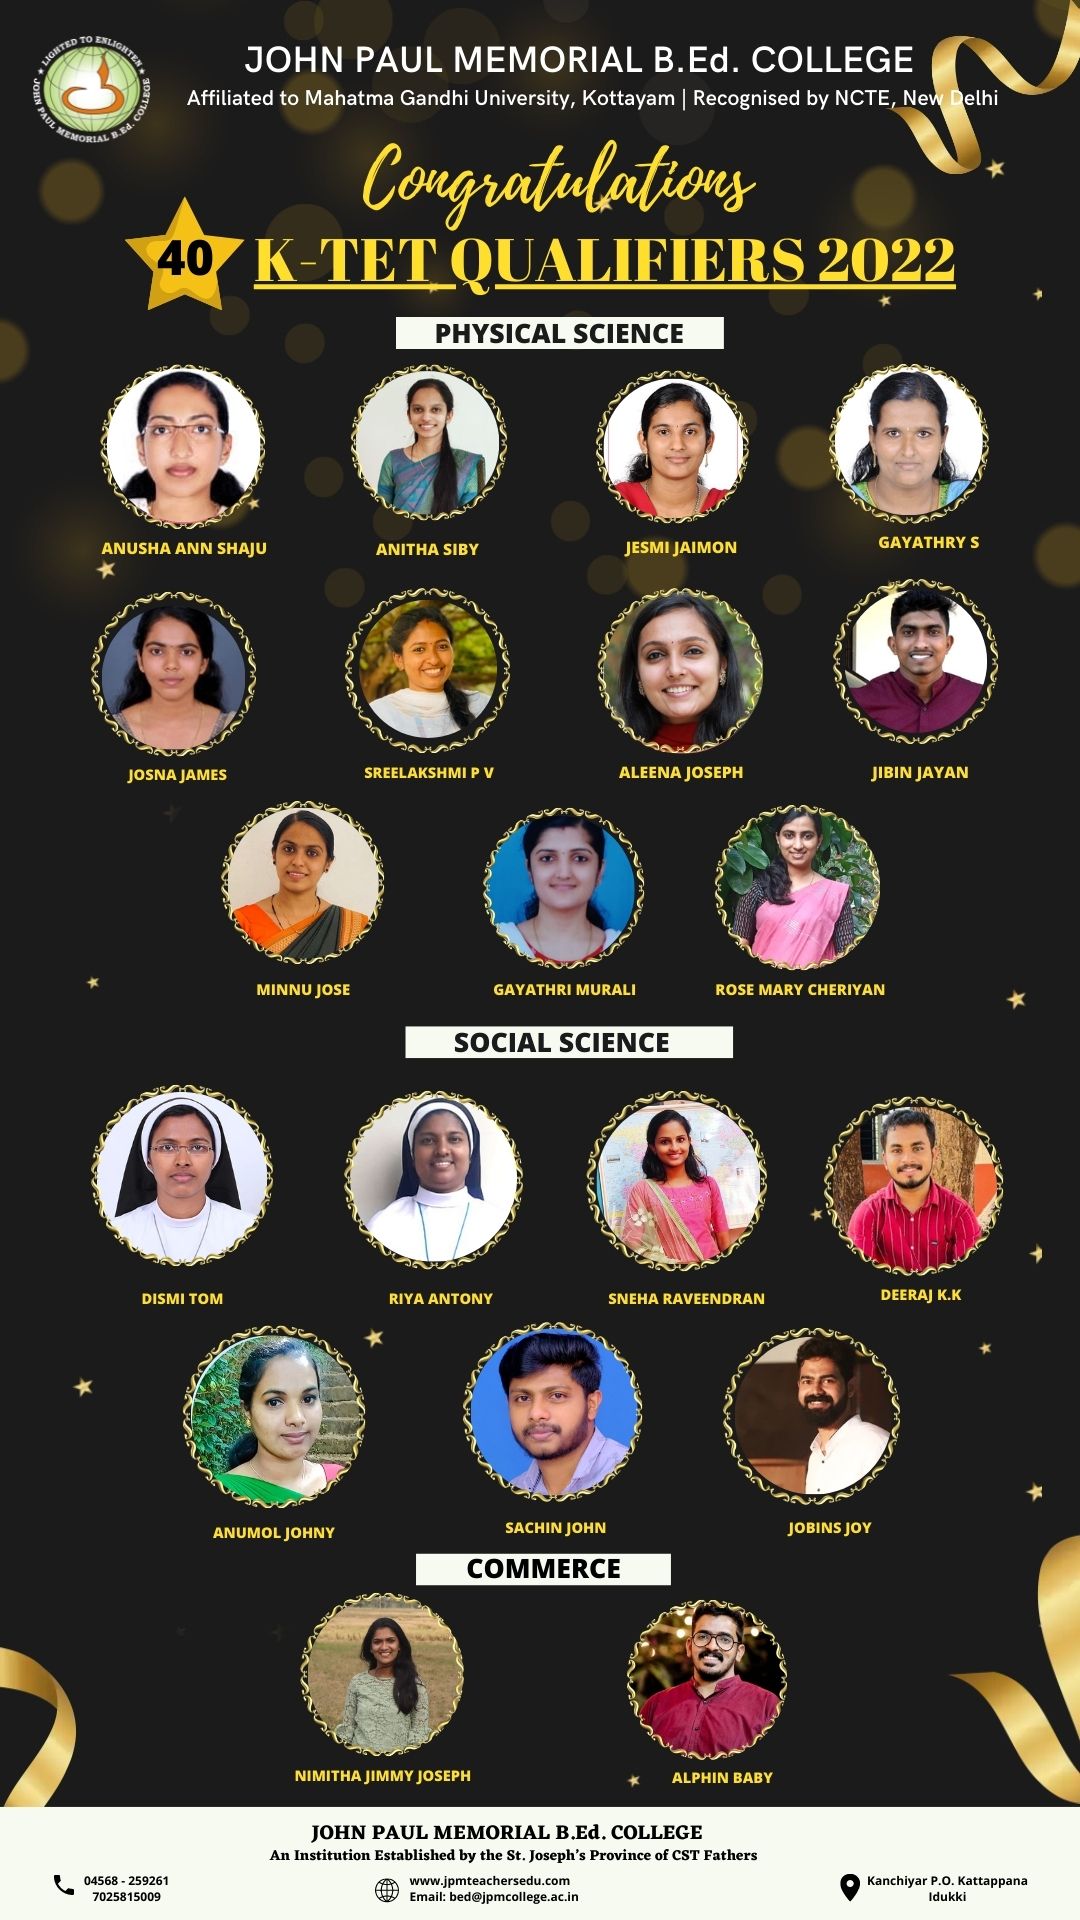 Congratulations to all K -TET Qualifiers 2022